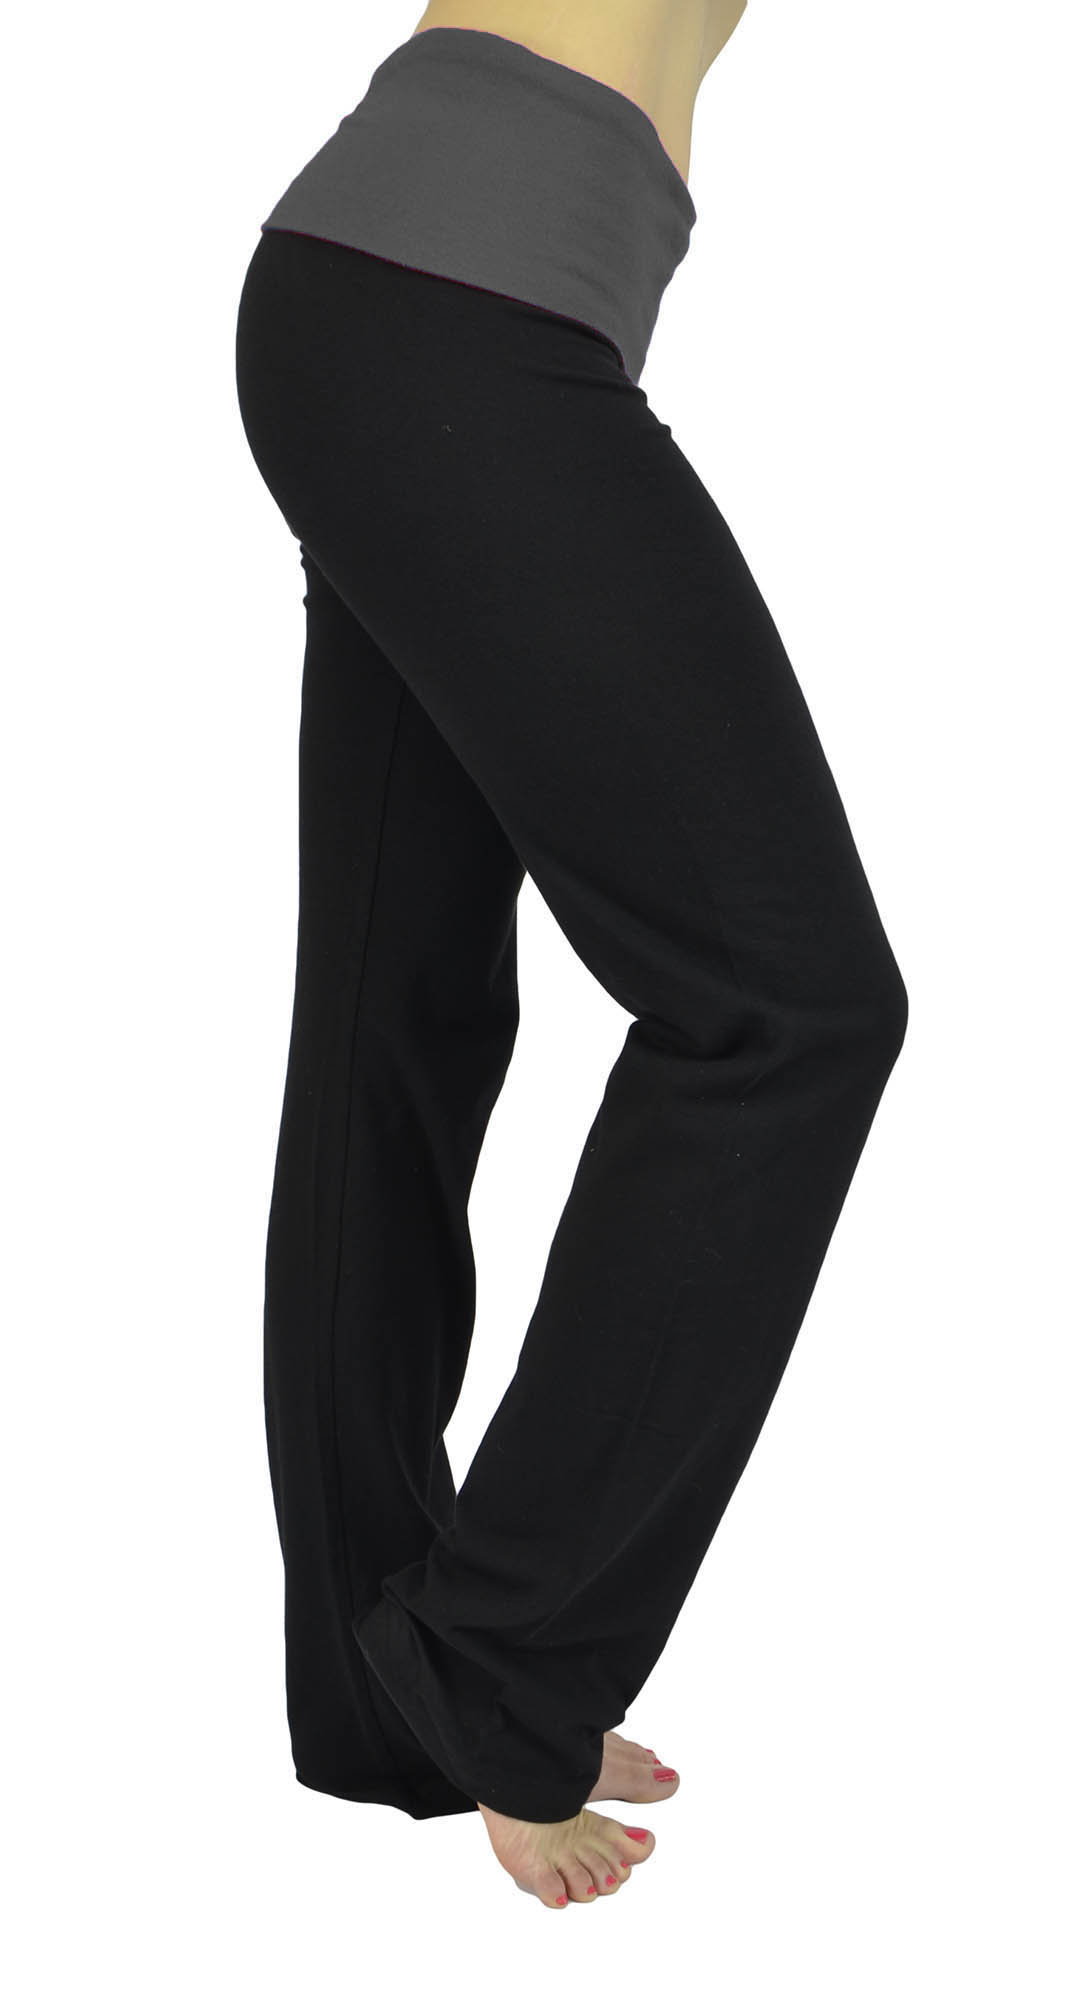 Belle Donne Womens Workout Fexible Fold Over Cotton Yoga Pants-Charcoal/Medium